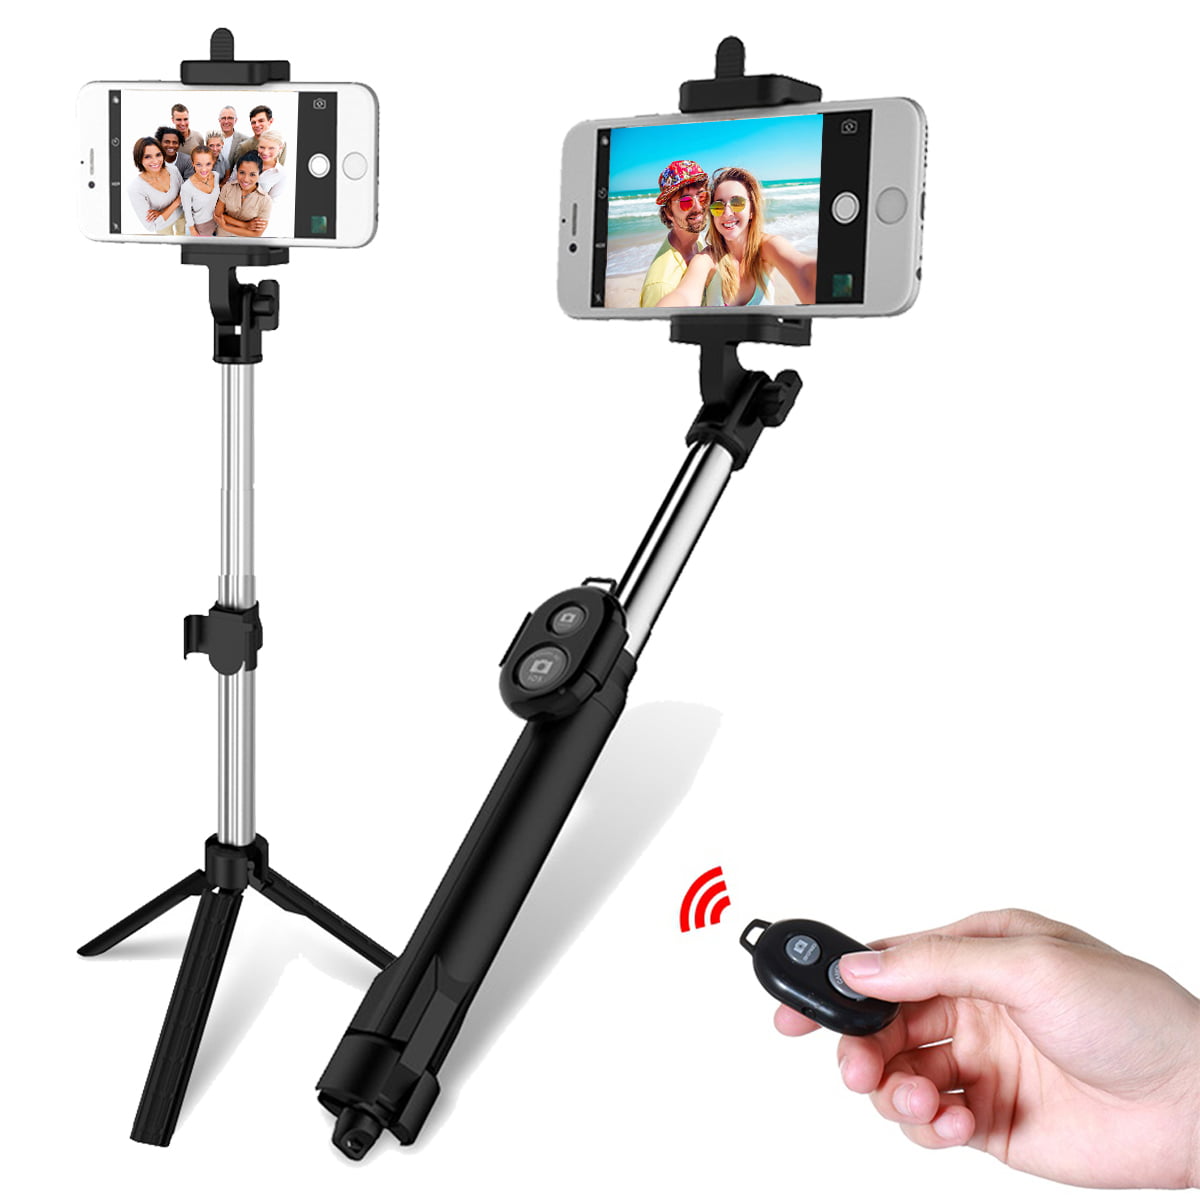 selfie stick or camera stand with remote for pro photo shots apple android phone 